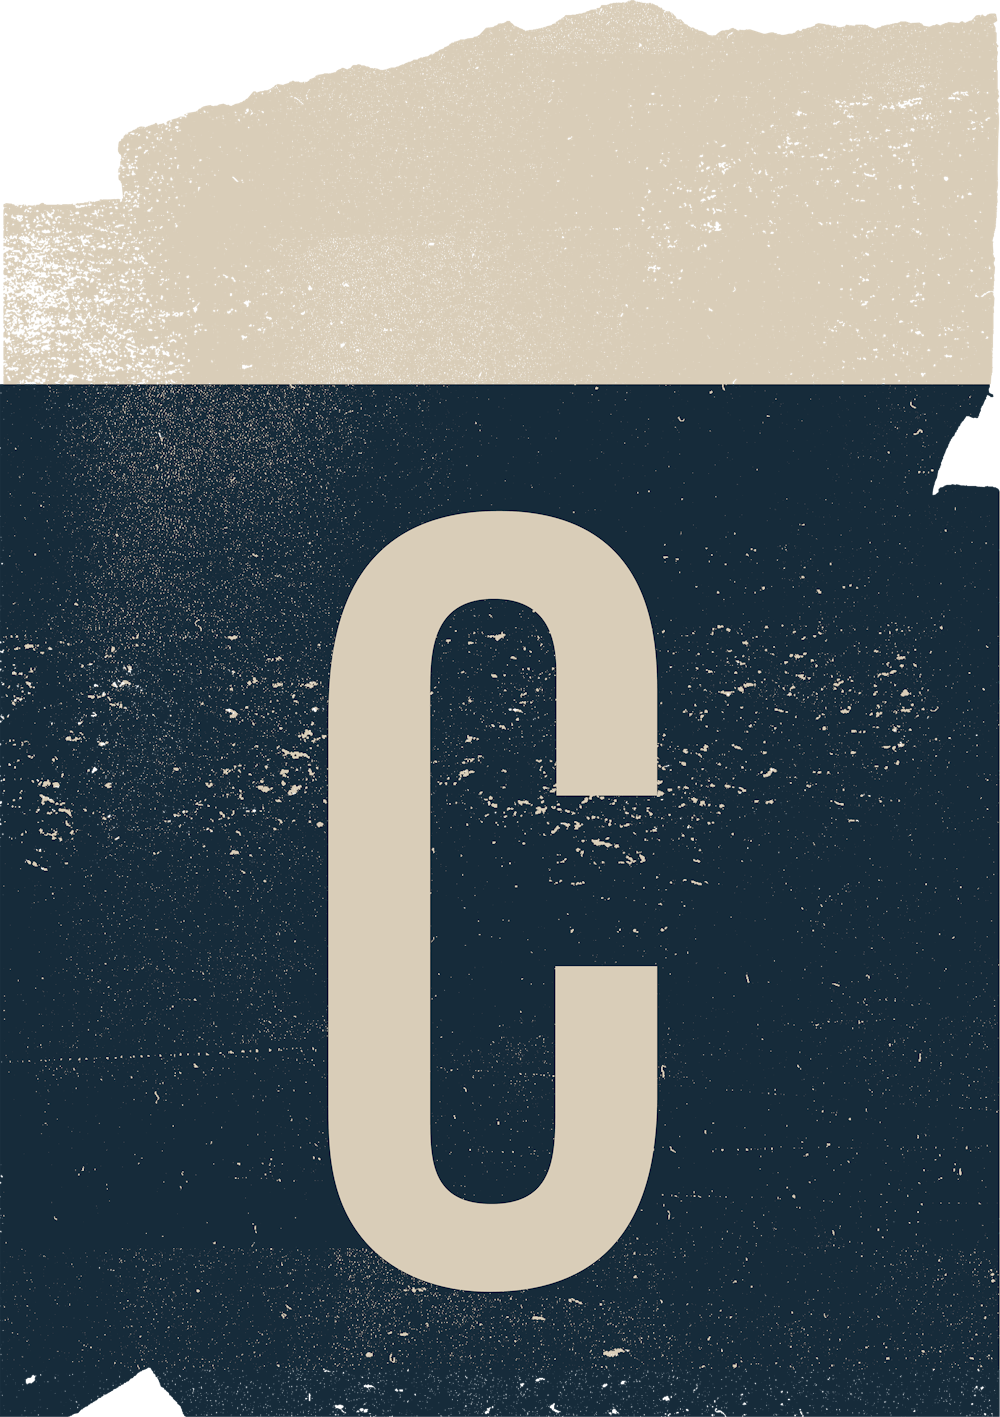 hill of C letter graphic